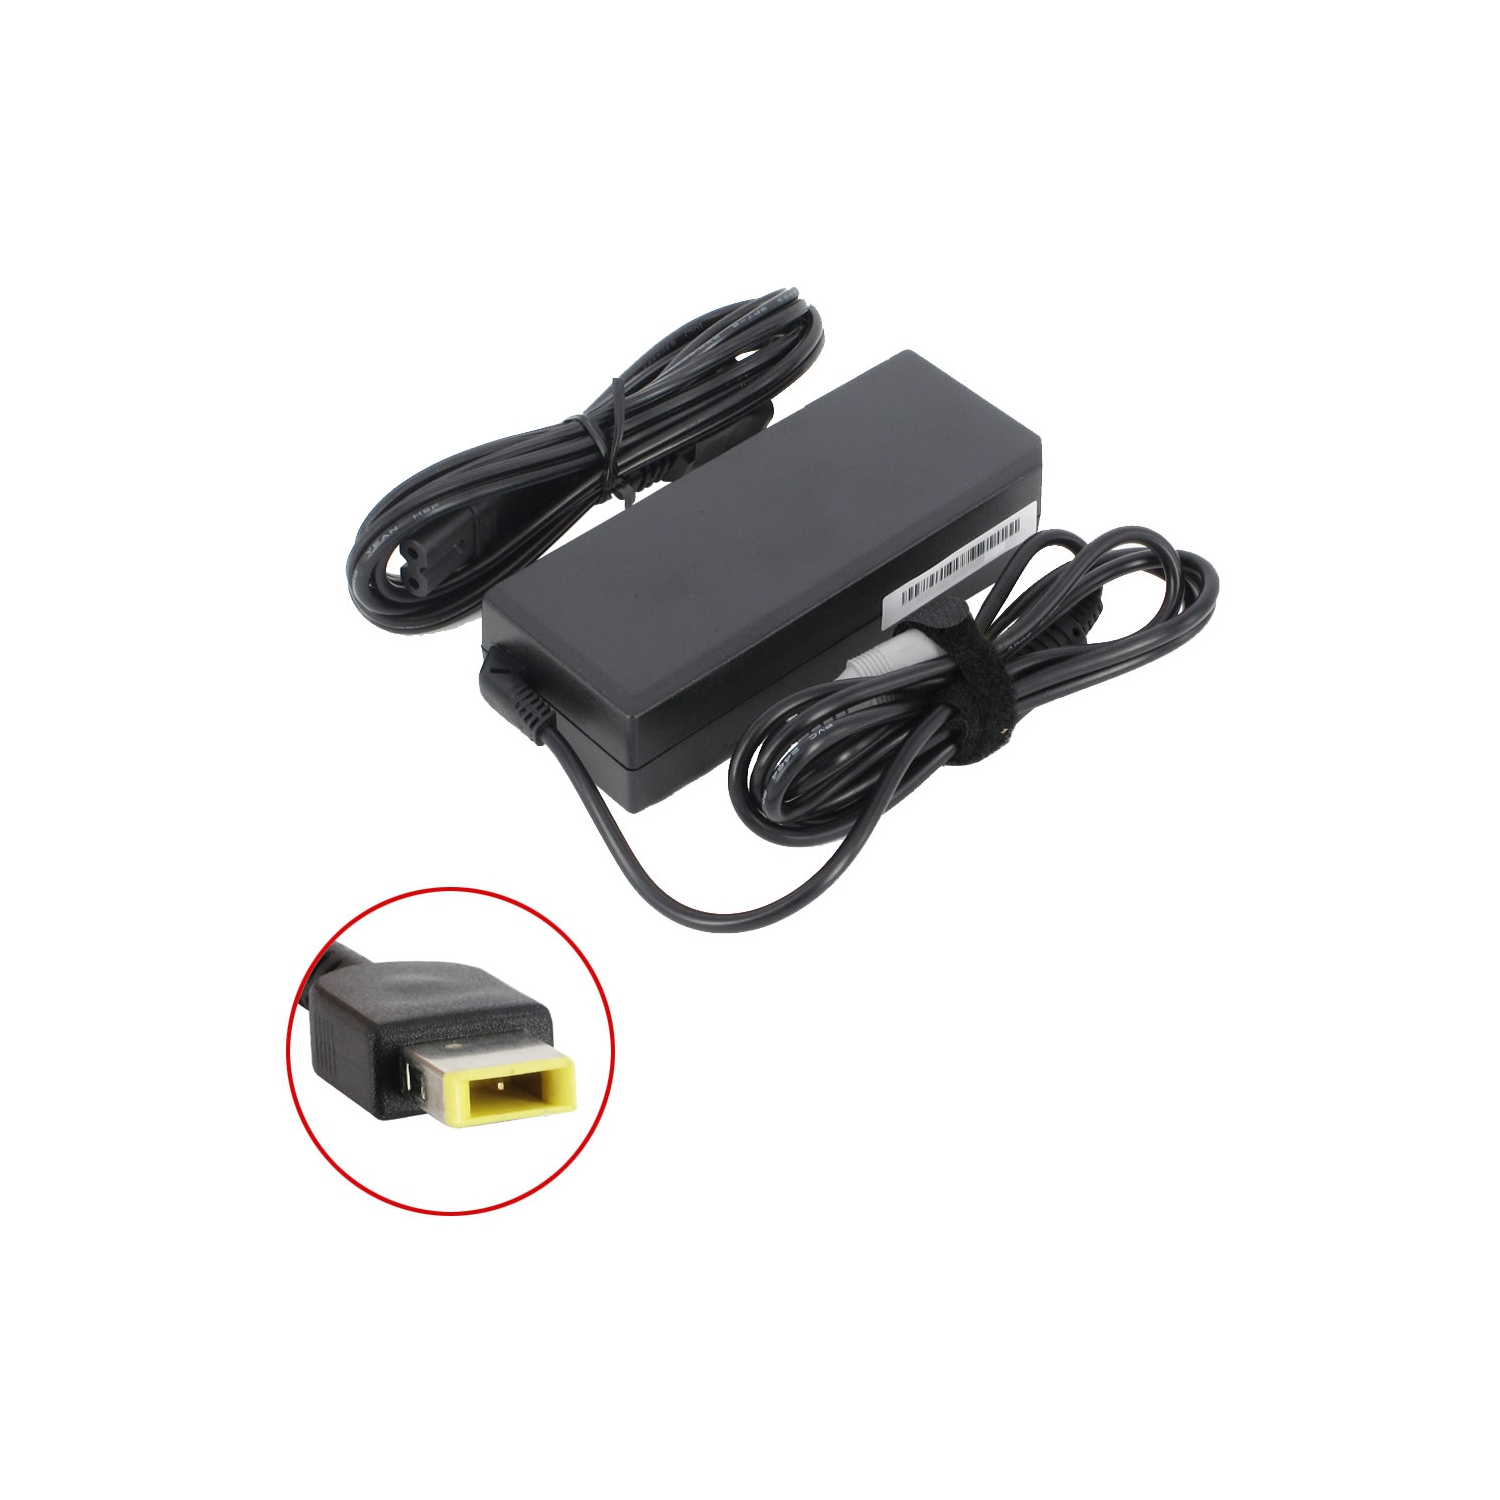 Brand New Laptop AC Adapter for Lenovo Essential G400, ADP-65XB A, 0B47481, 45N0293, 45N0482, PA-1650-37LF